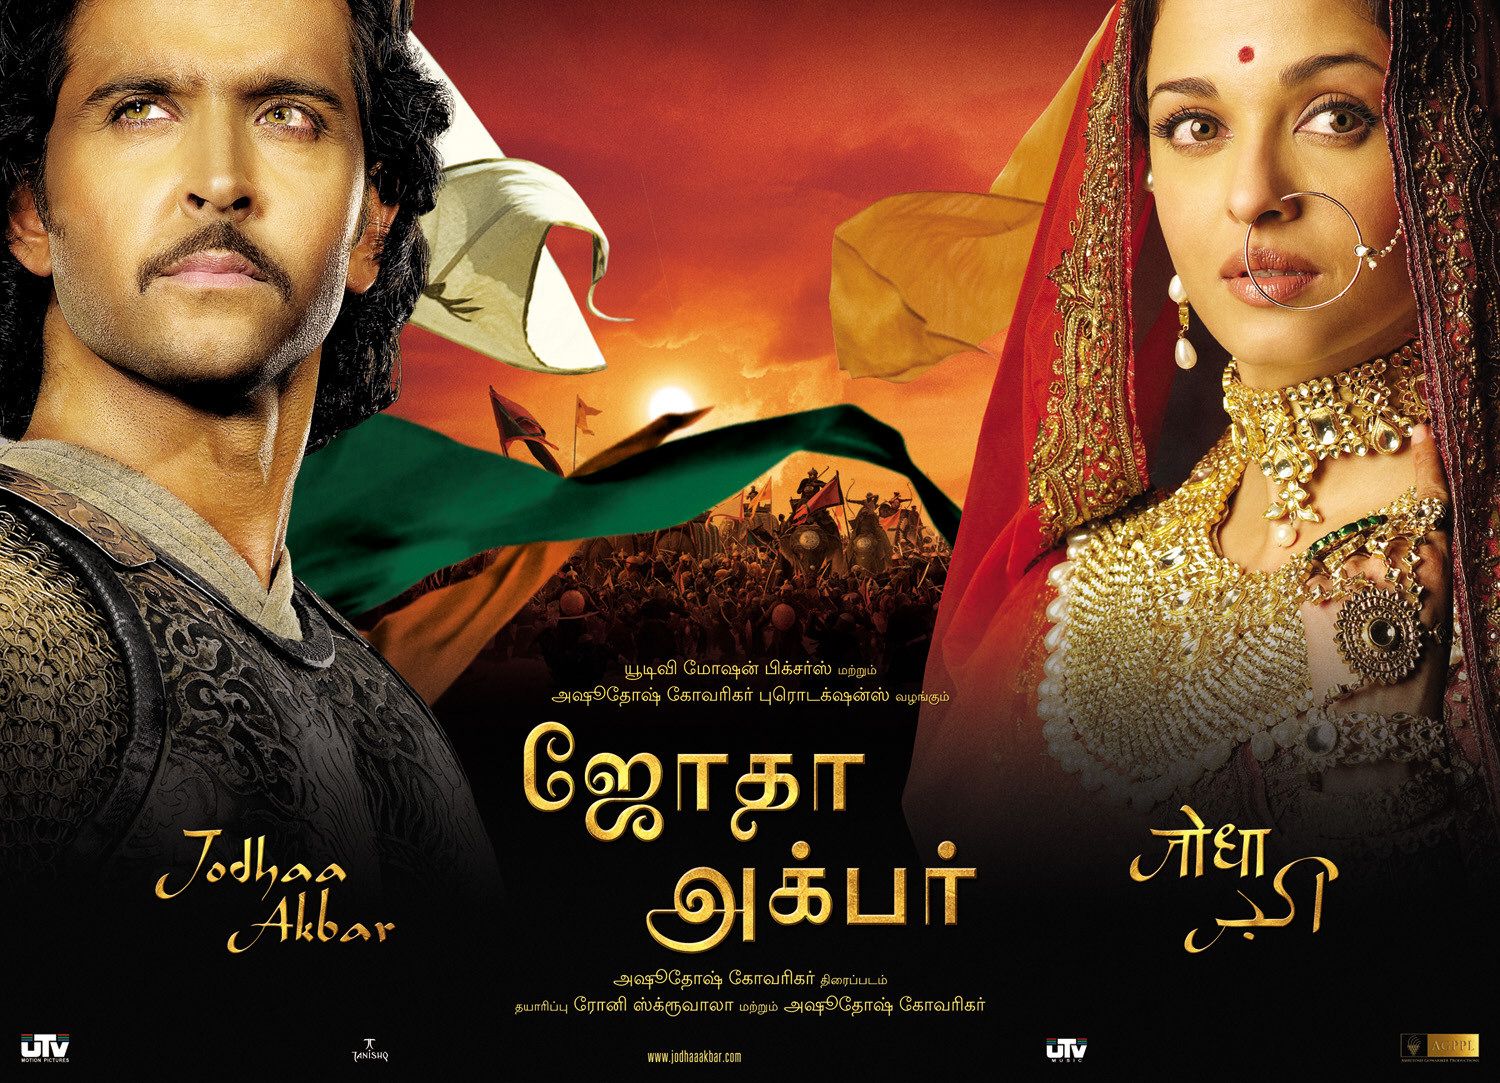 Extra Large Movie Poster Image for Jodhaa Akbar (#12 of 15)